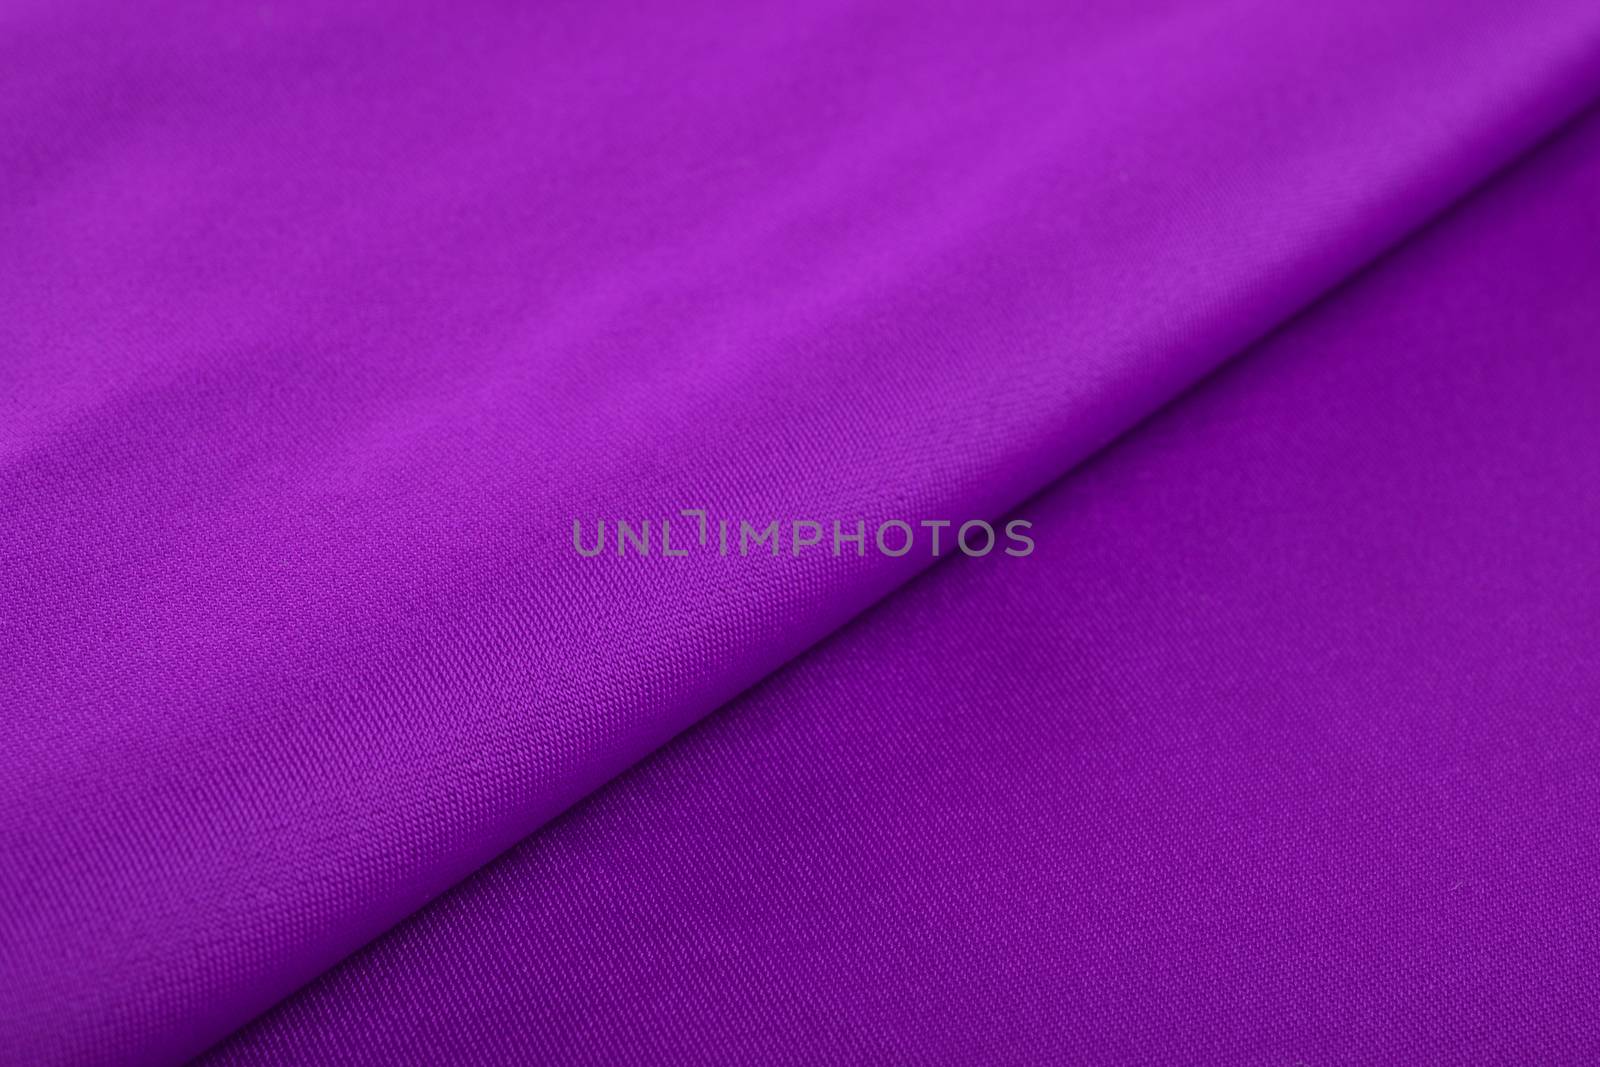 purple Knitted elastic fabric, weaving of threads texture, crumpled fold. For underwear, sports clothes and swimwear. Space for text.